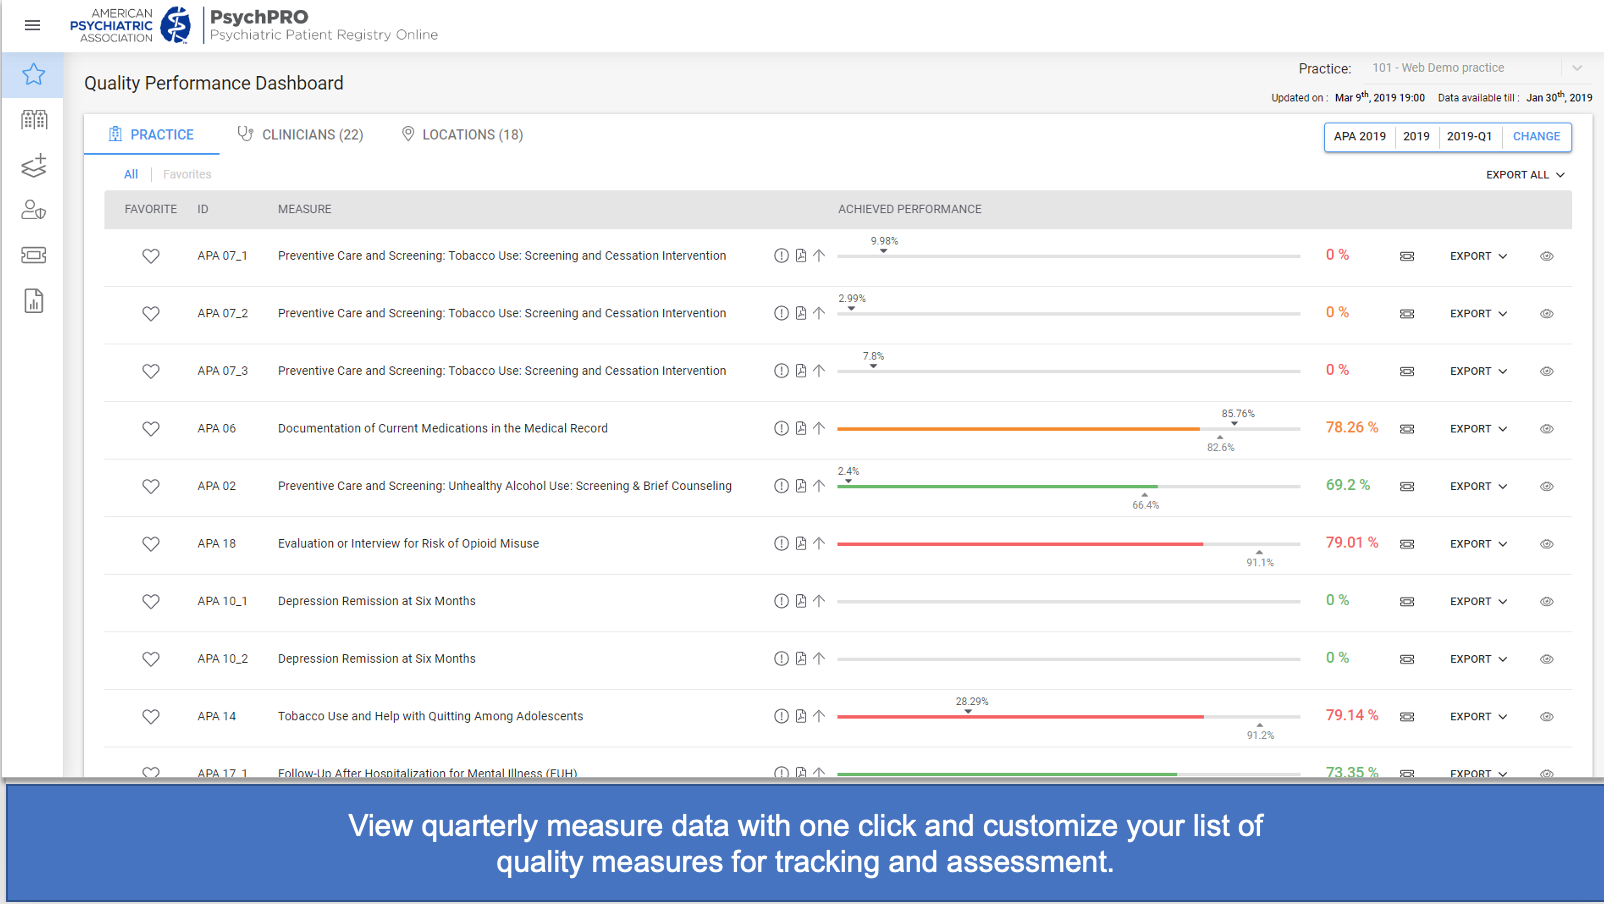 Screenshot of the view of the Dashboard in the PsychPRO Portal with the text View quarterly measure data with one click and customize your list of quality measures for tracking and assessment